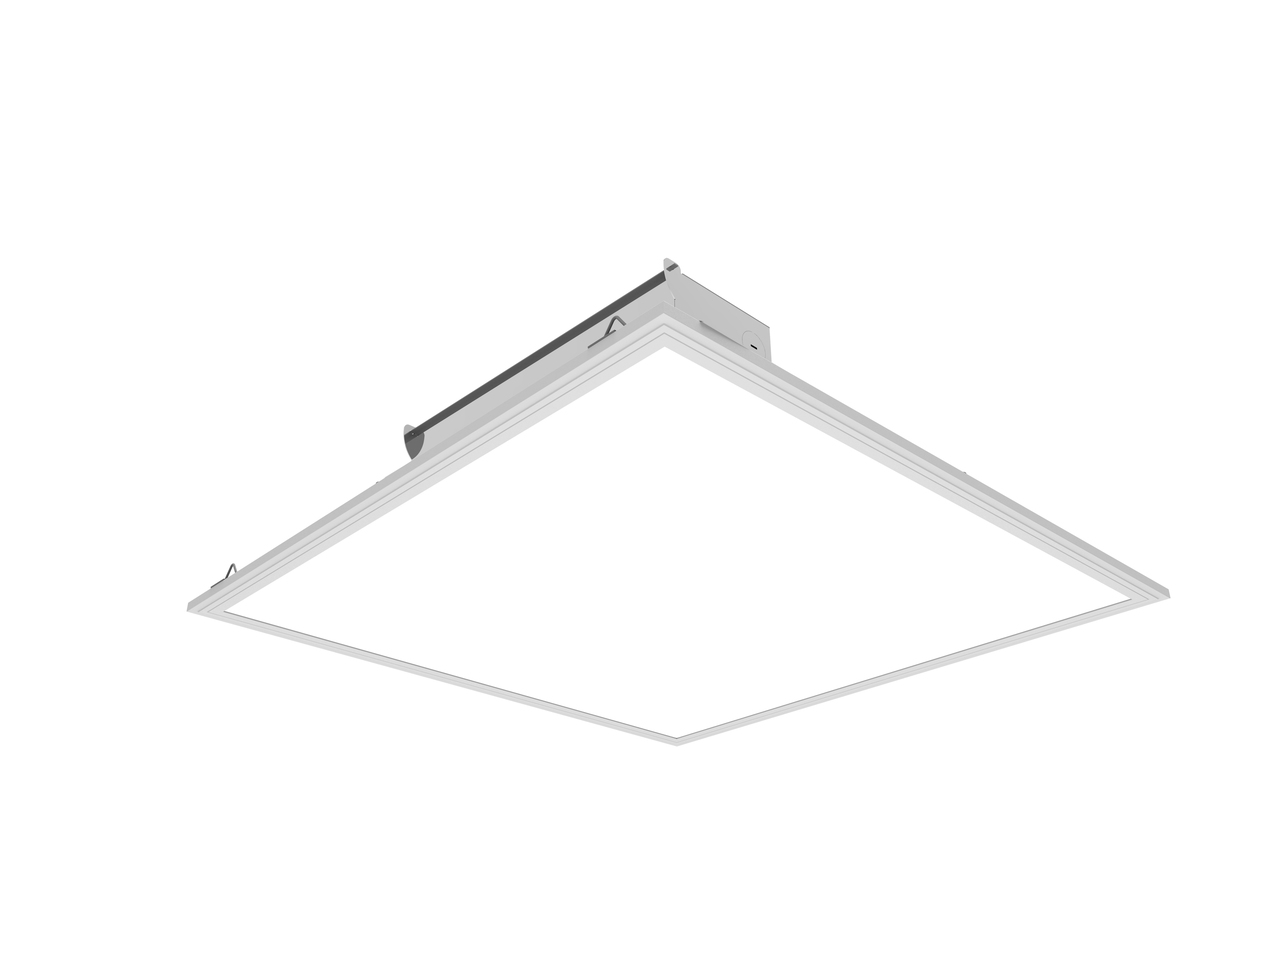 LED Flat Panel 2X2 - Color Tunable 3500K, 4000K, 5000K - Dimmable - For Standard Drop Ceilings